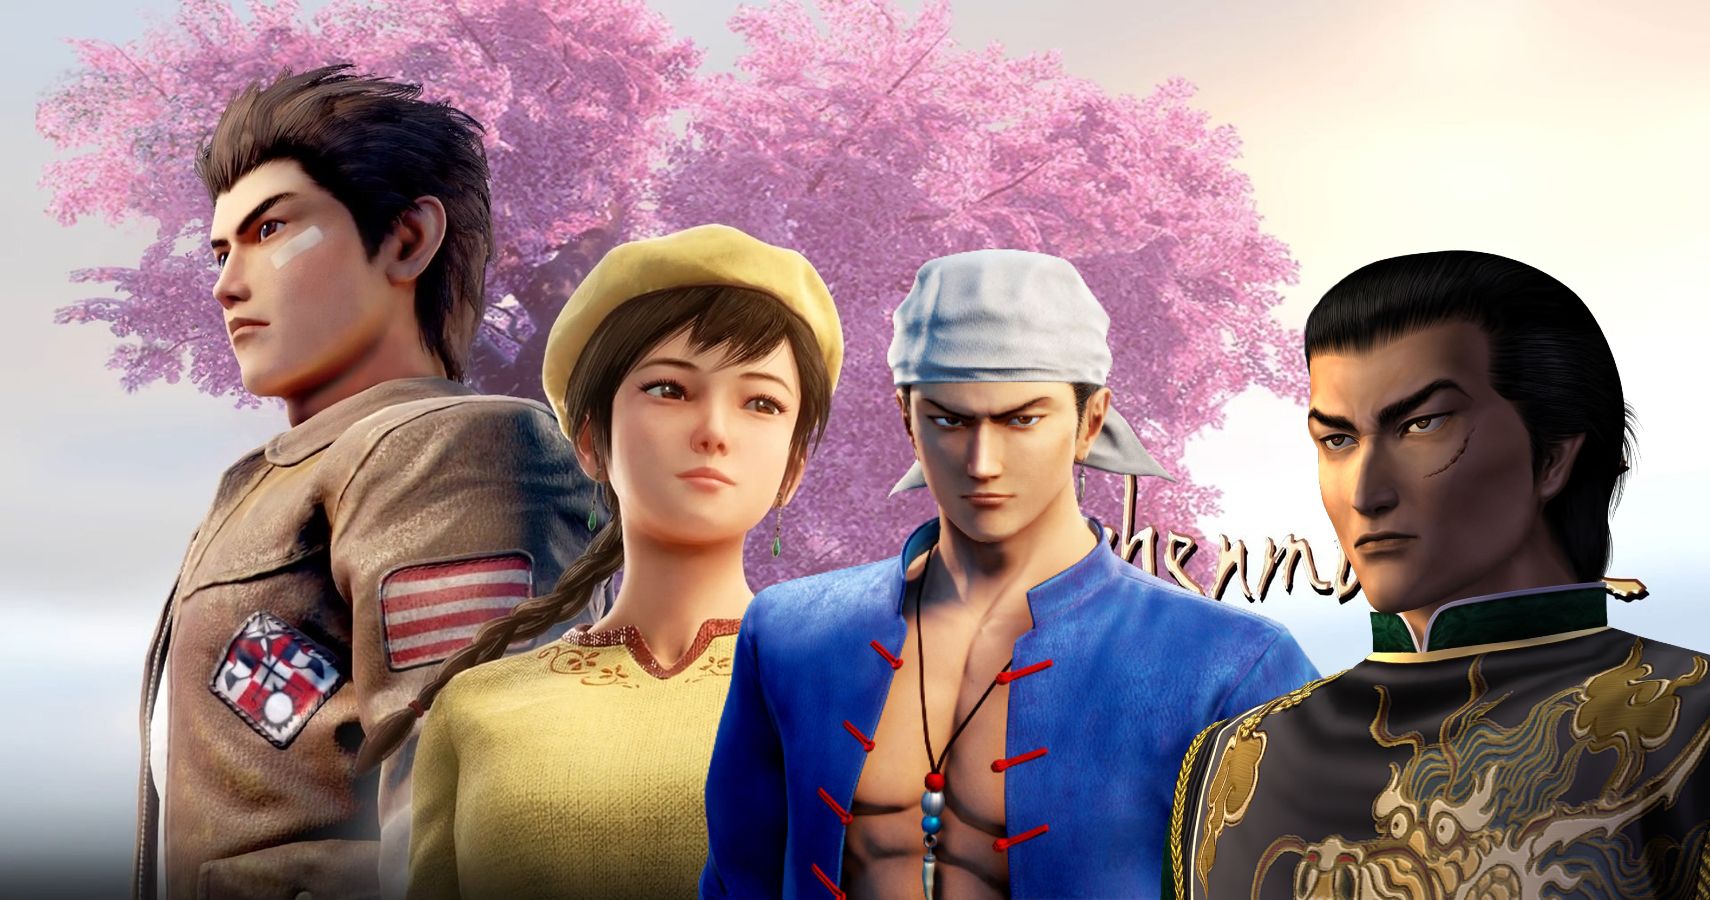 Shenmue 3 Now Has Original Actors Eric Kelso and Paul LucasReturn To Their Roles